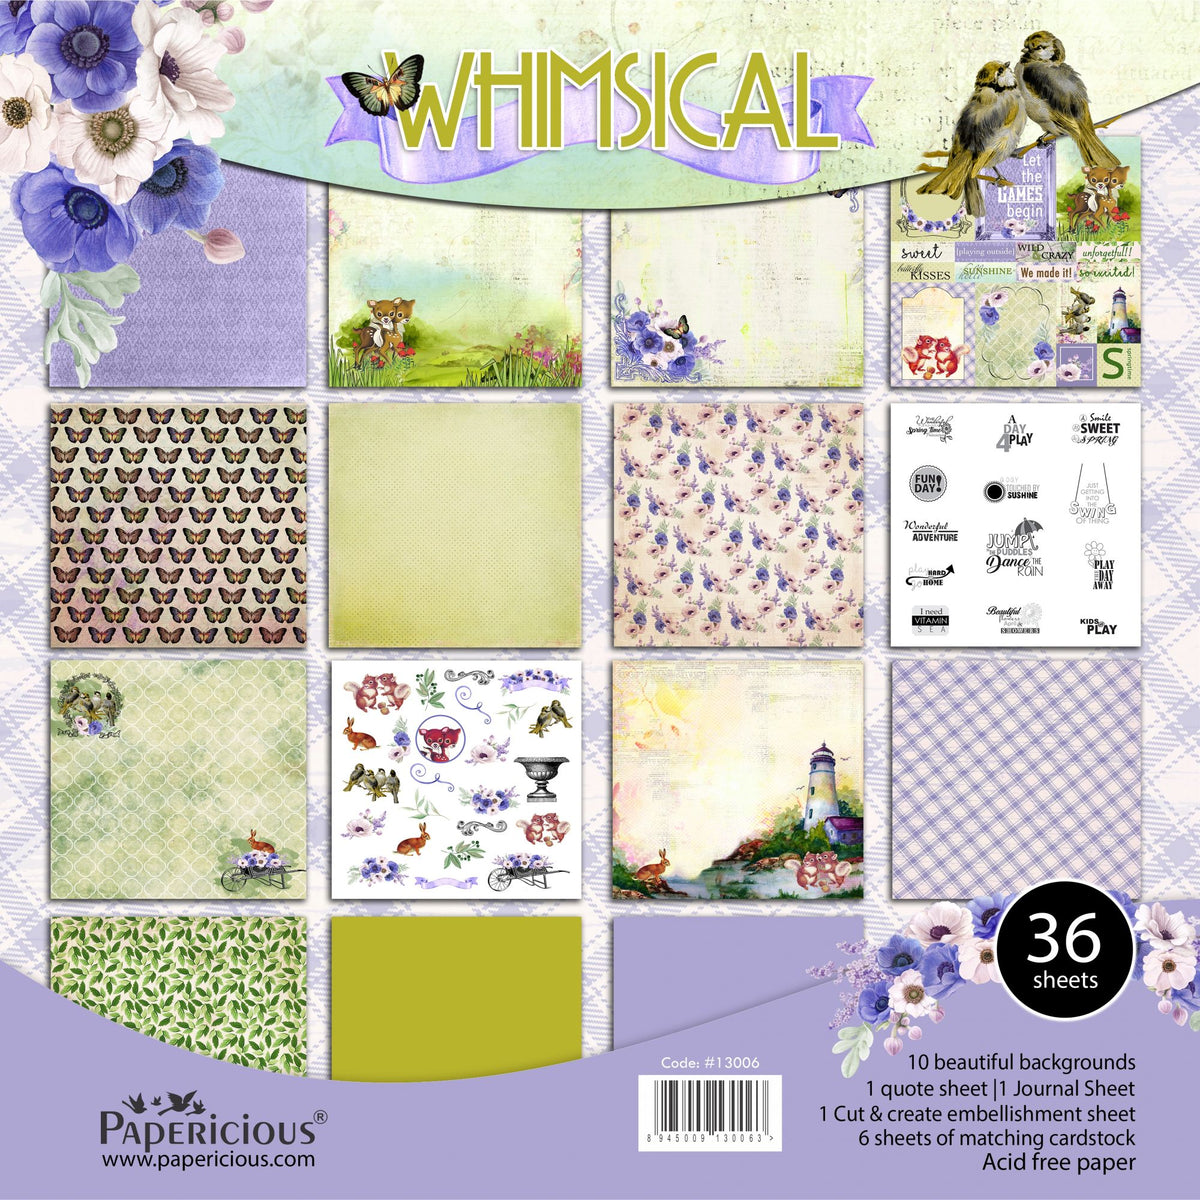 PAPERICIOUS - Whimscial -  Designer Pattern Printed Scrapbook Papers 12x12 inch / 36 sheets